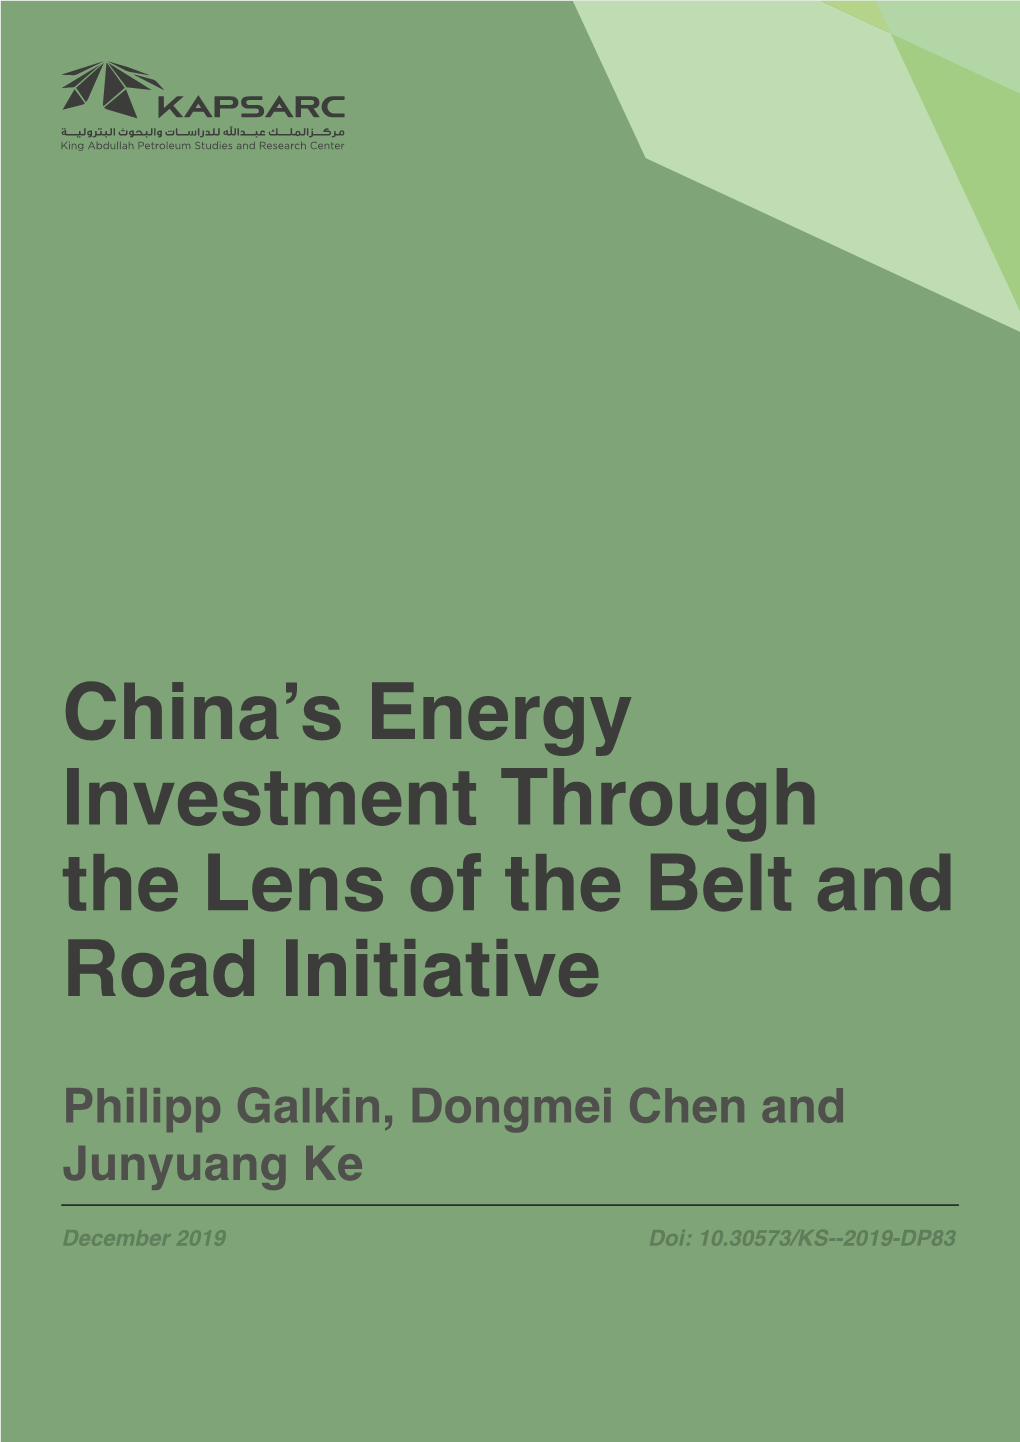 China's Energy Investment Through the Lens of the Belt and Road Initiative